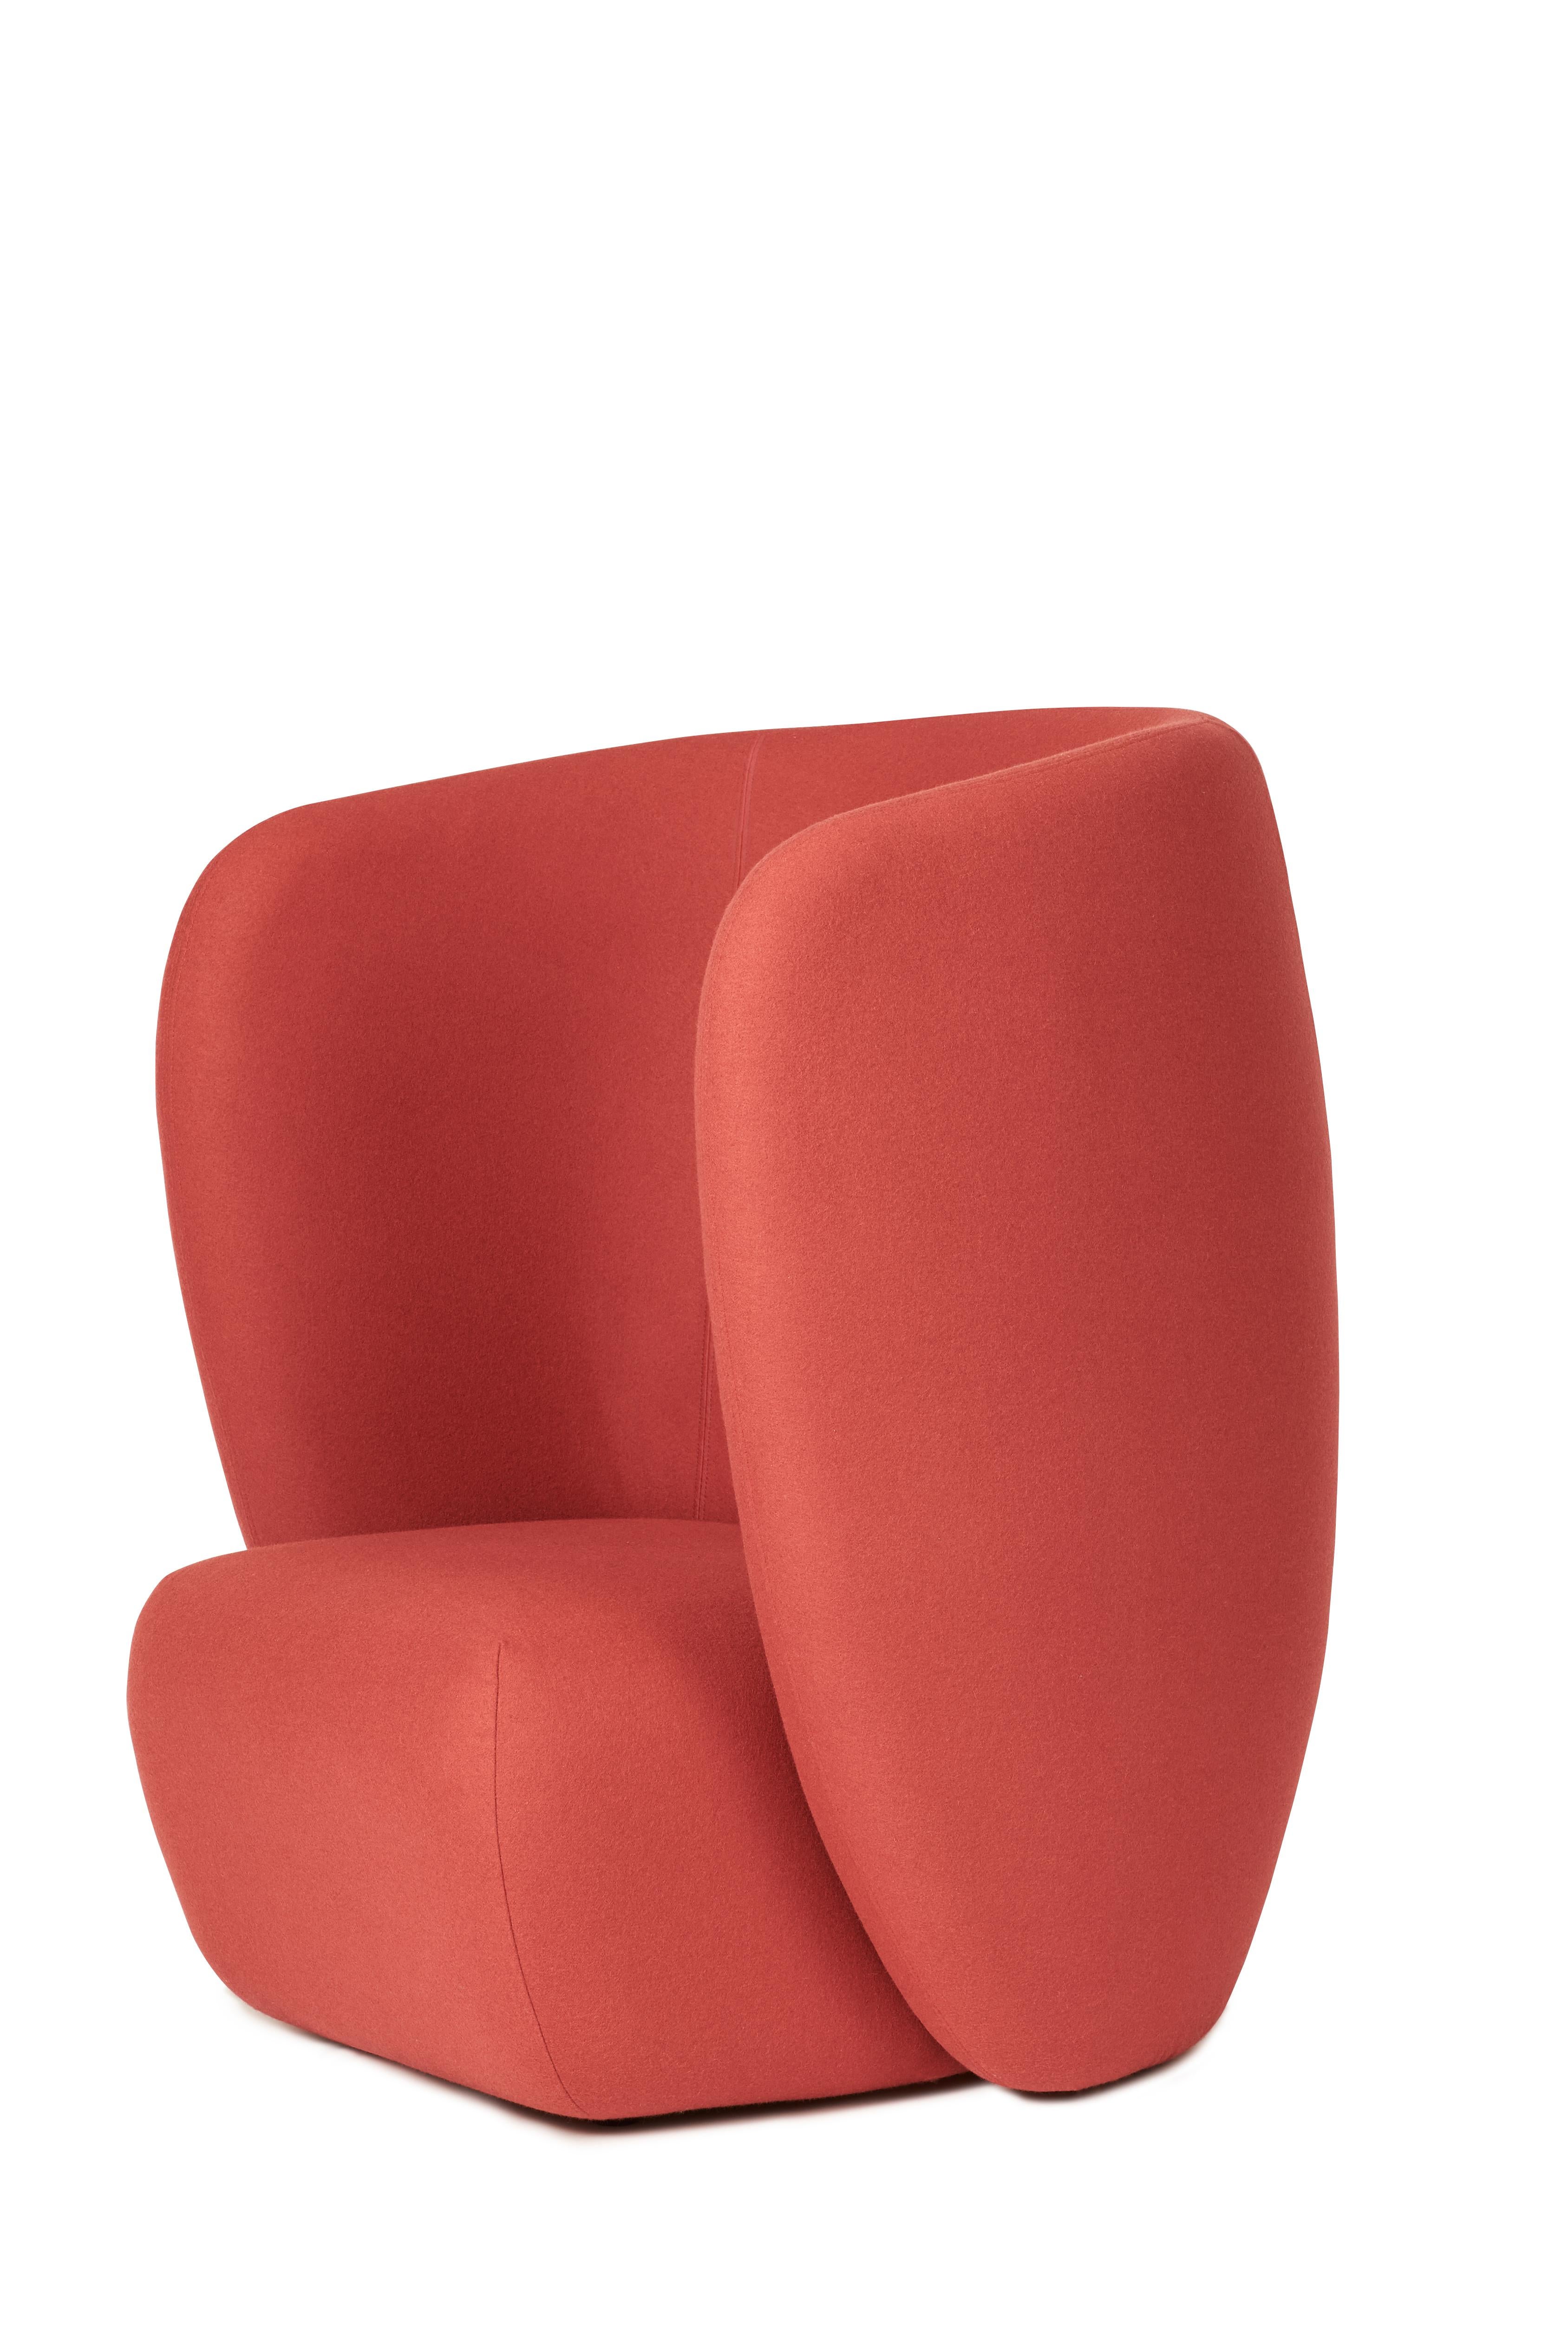 For Sale: Red (Hero 551) Haven Lounge Chair, by Charlotte Høncke from Warm Nordic 2